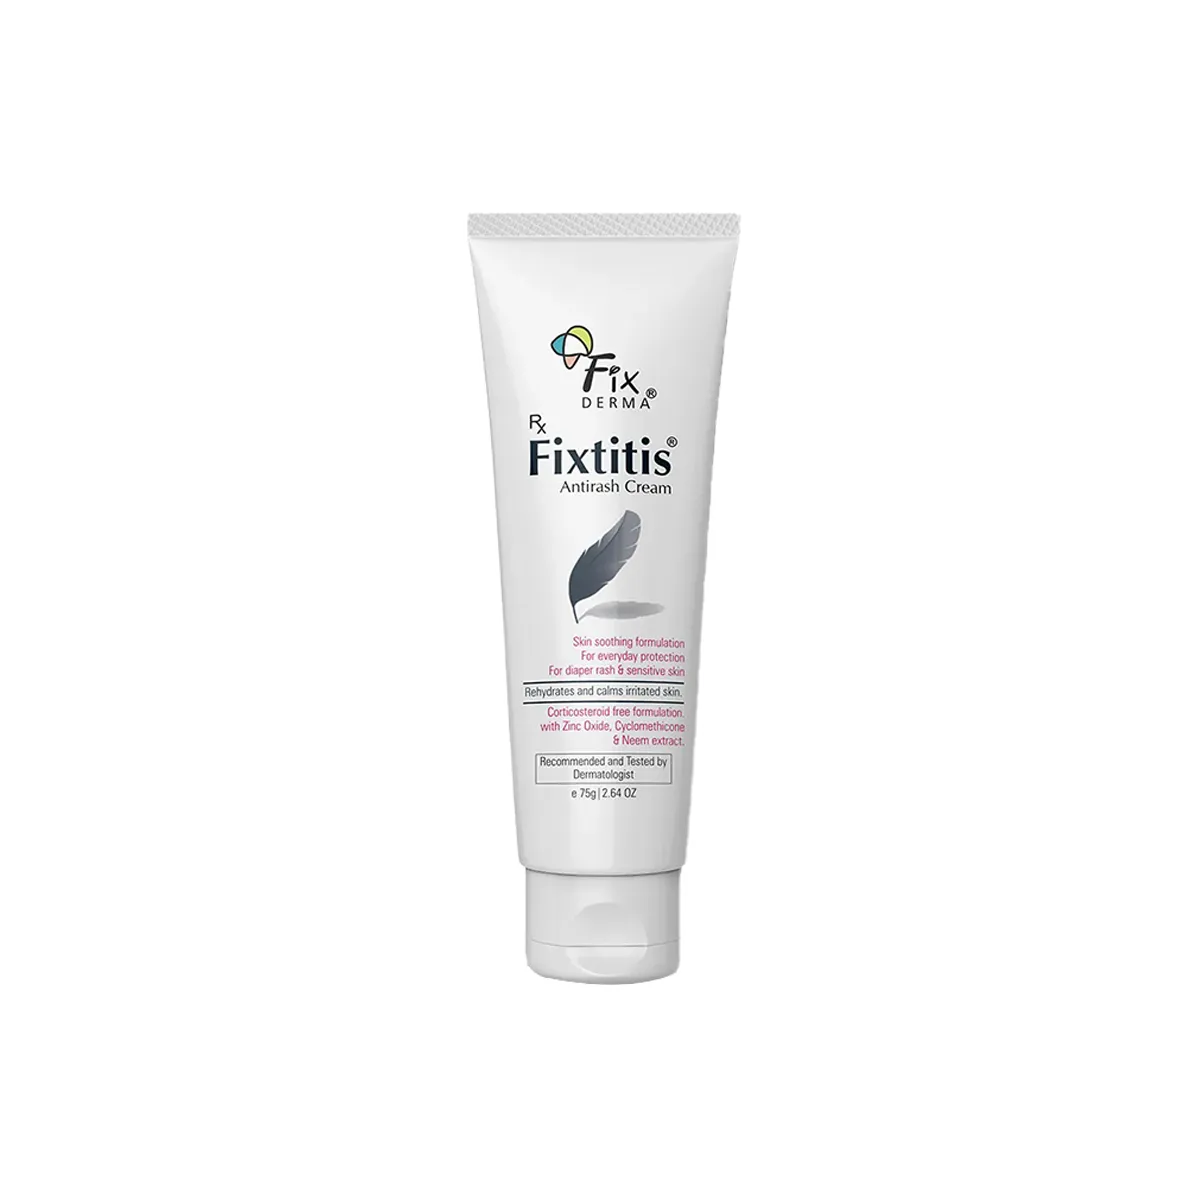 First product image of Fixderma Fixtitis Cream 75g